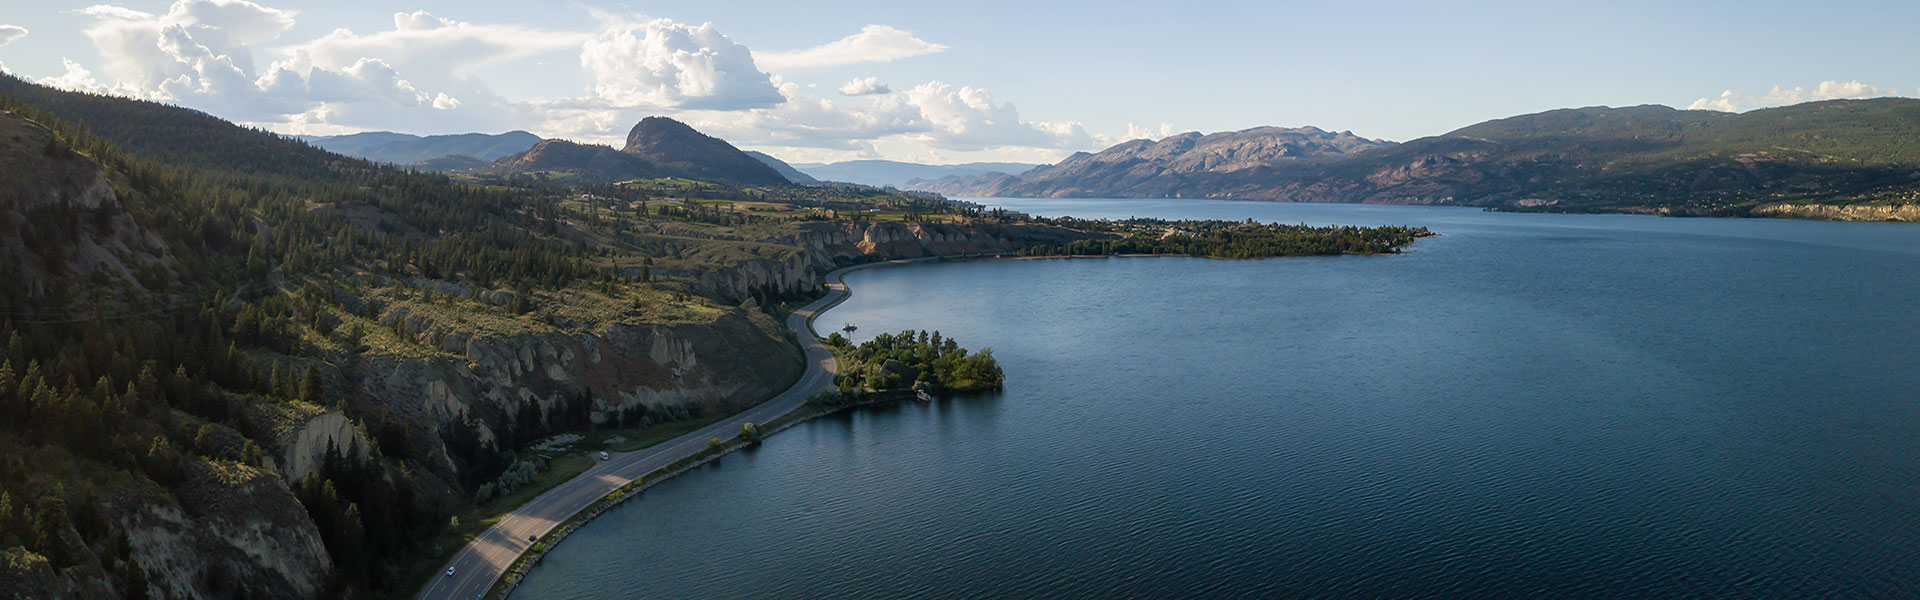 The formation of Lake Okanagan makes it a good potential home for unexplained species.